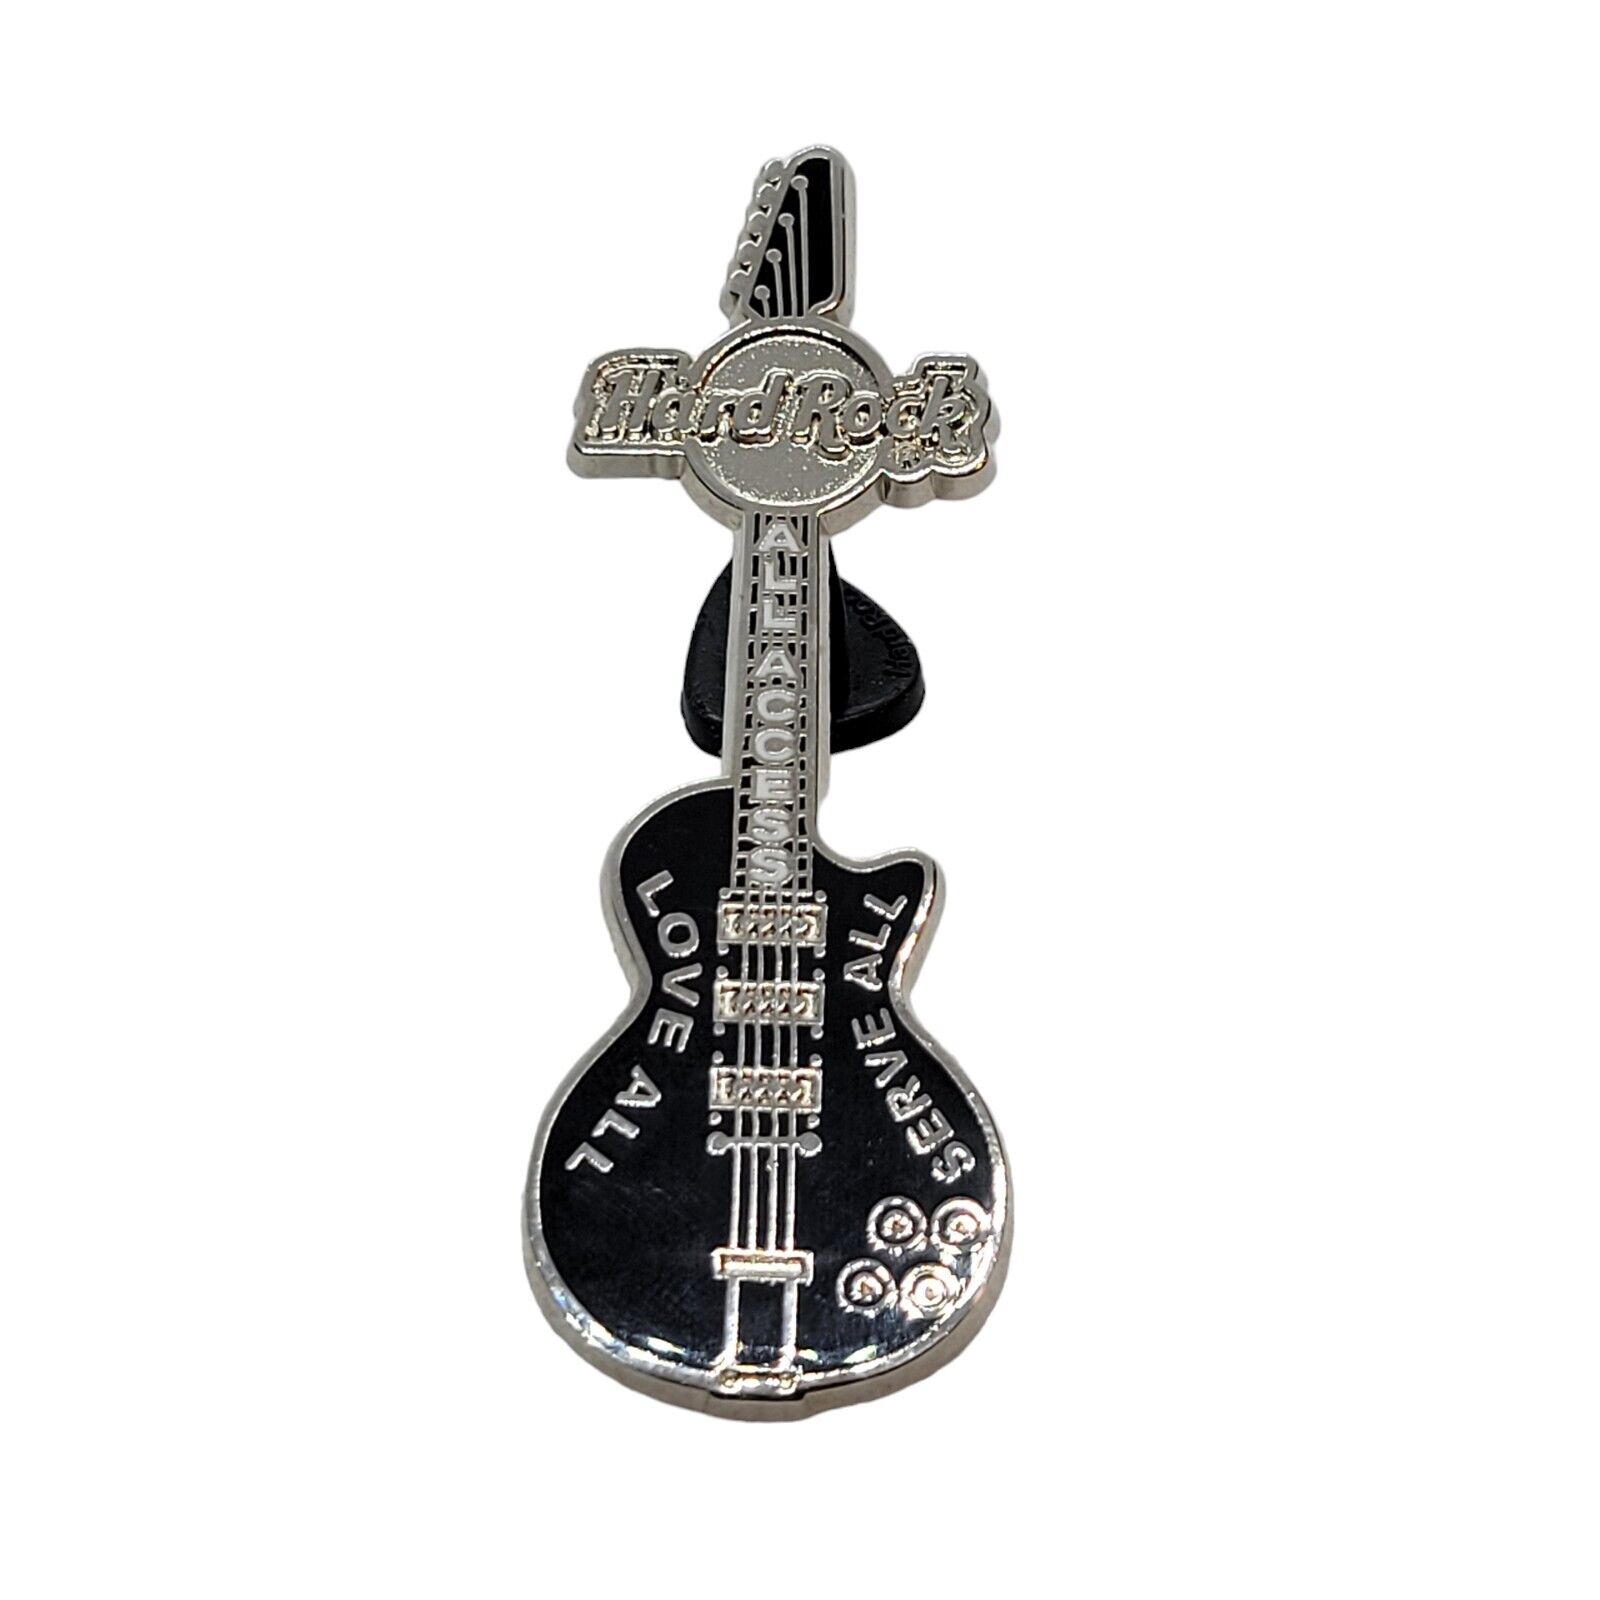 Hard Rock Cafe All Access Guitar Pin - Love All Serve All